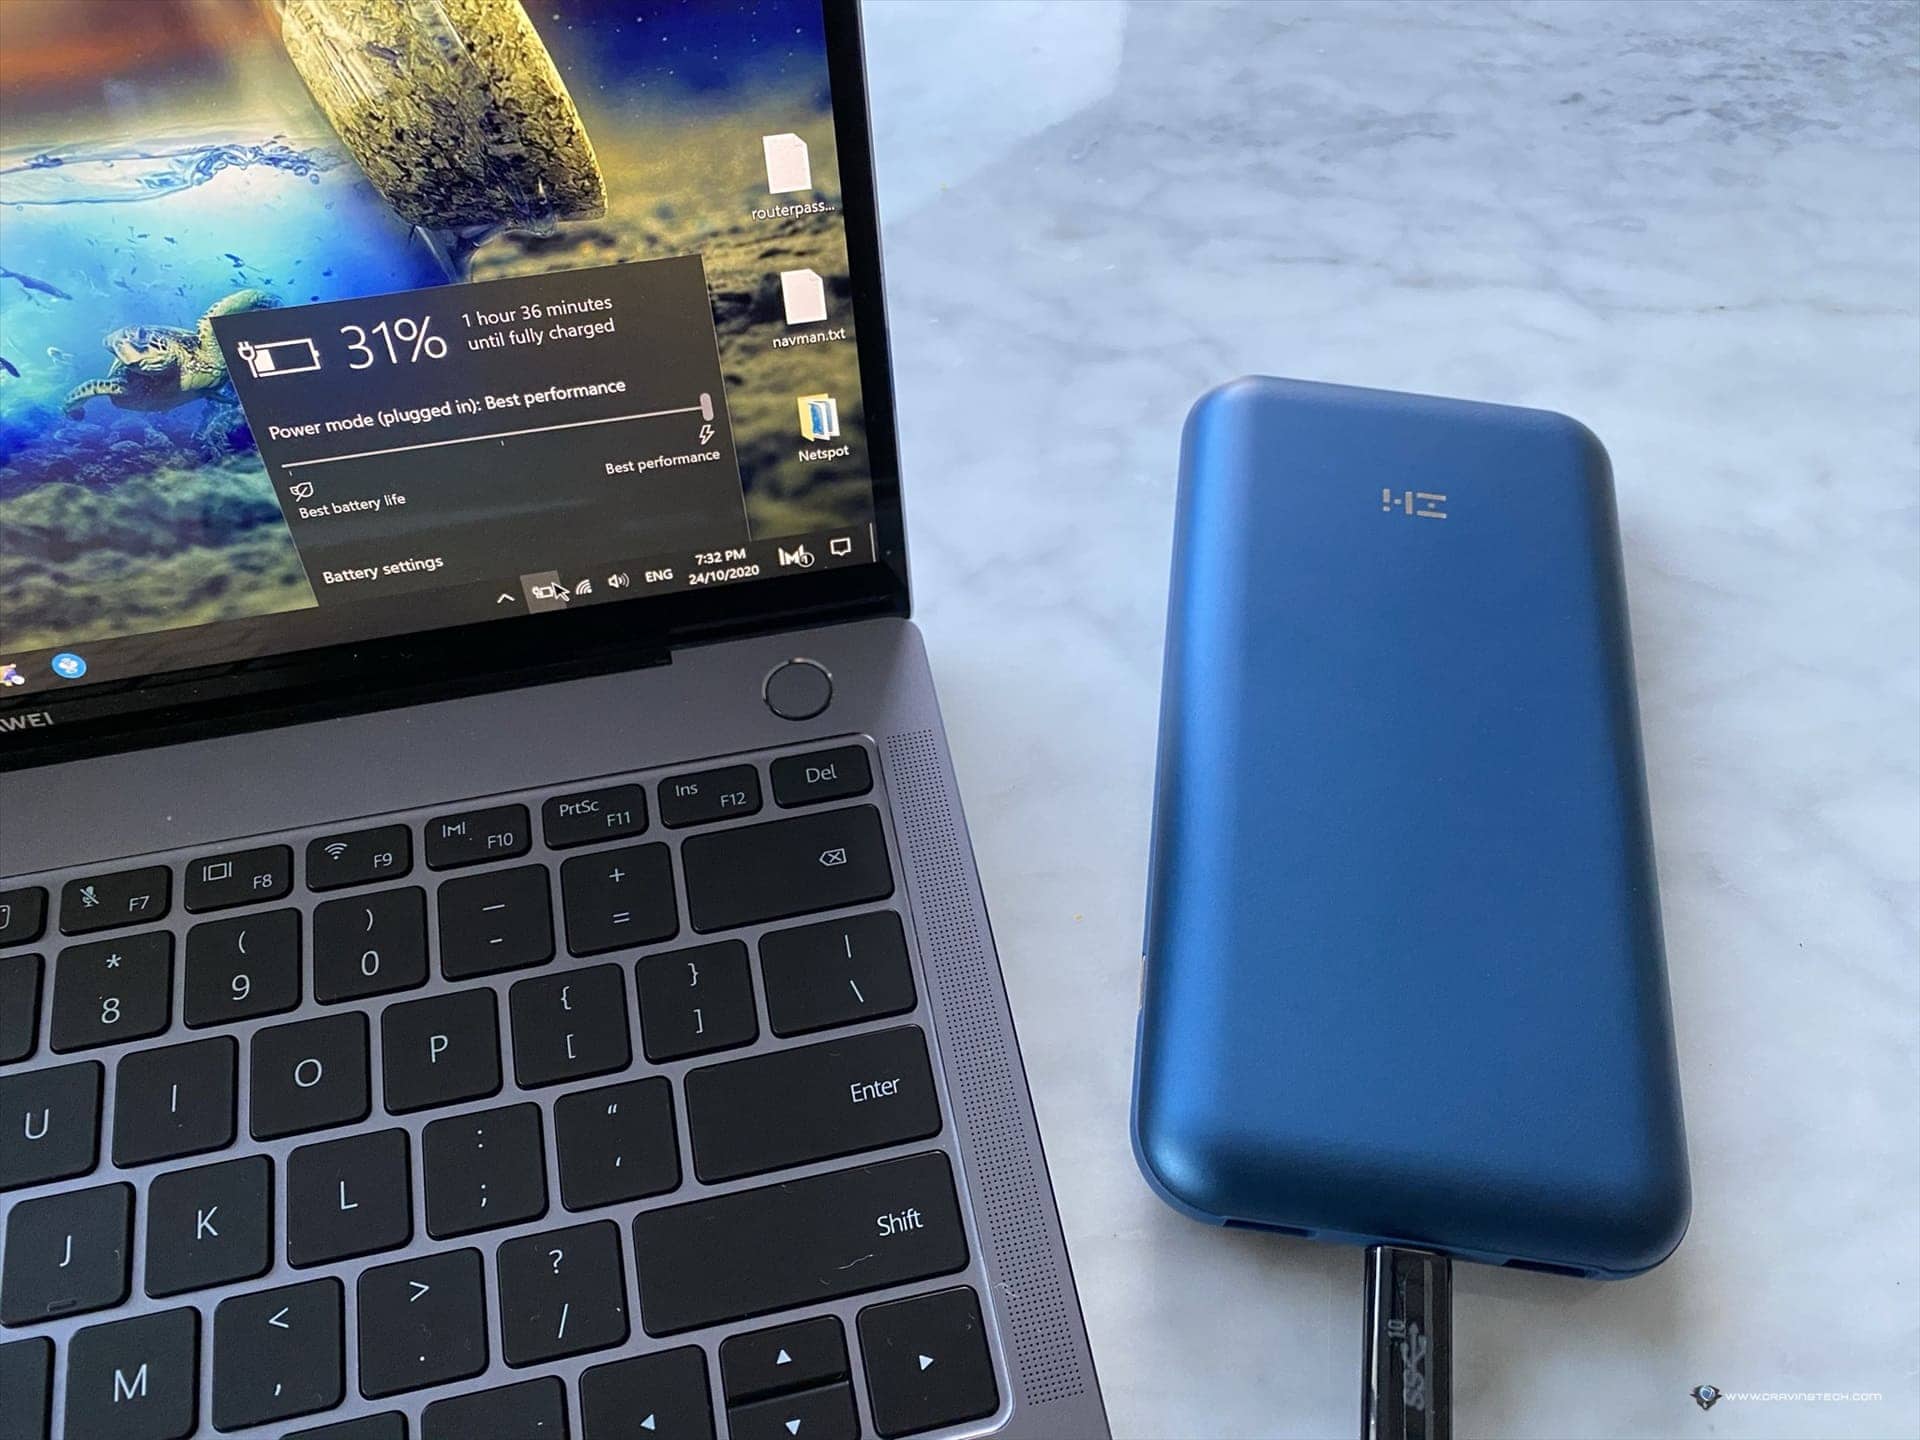 You can now charge your laptop with this 65W, 20000mAh Portable Power Bank from Xiaomi